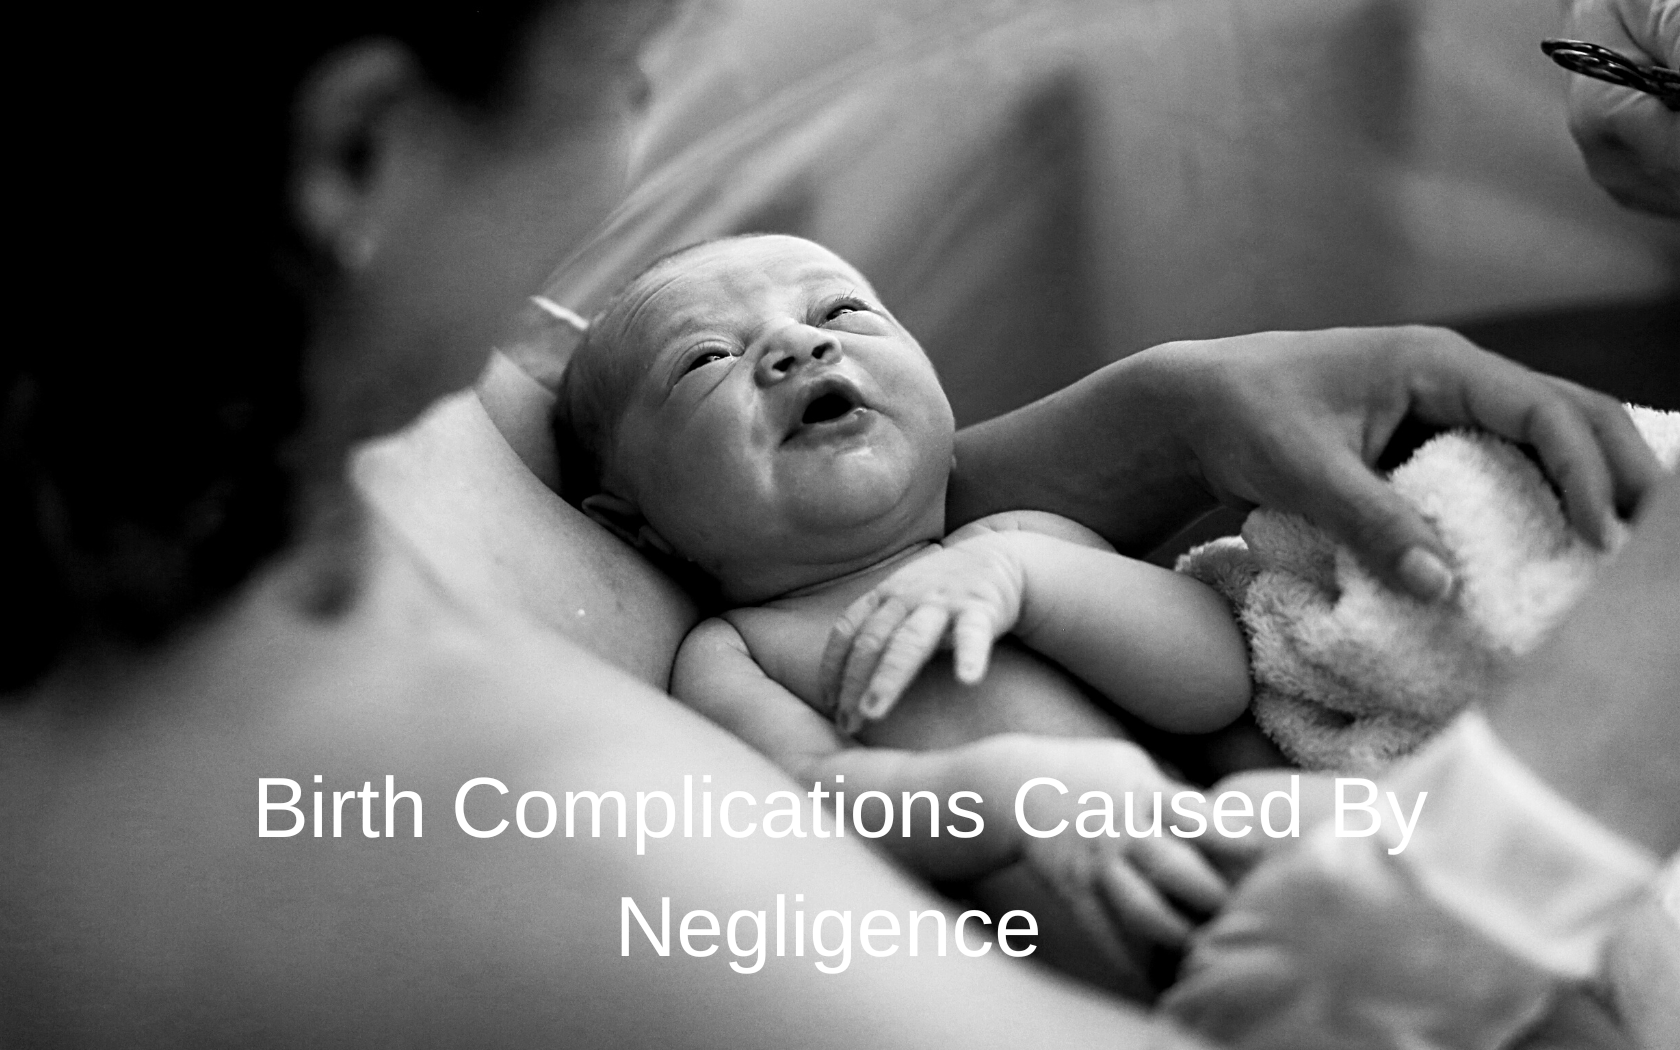 Birth complications can give babies an unfair chance at life